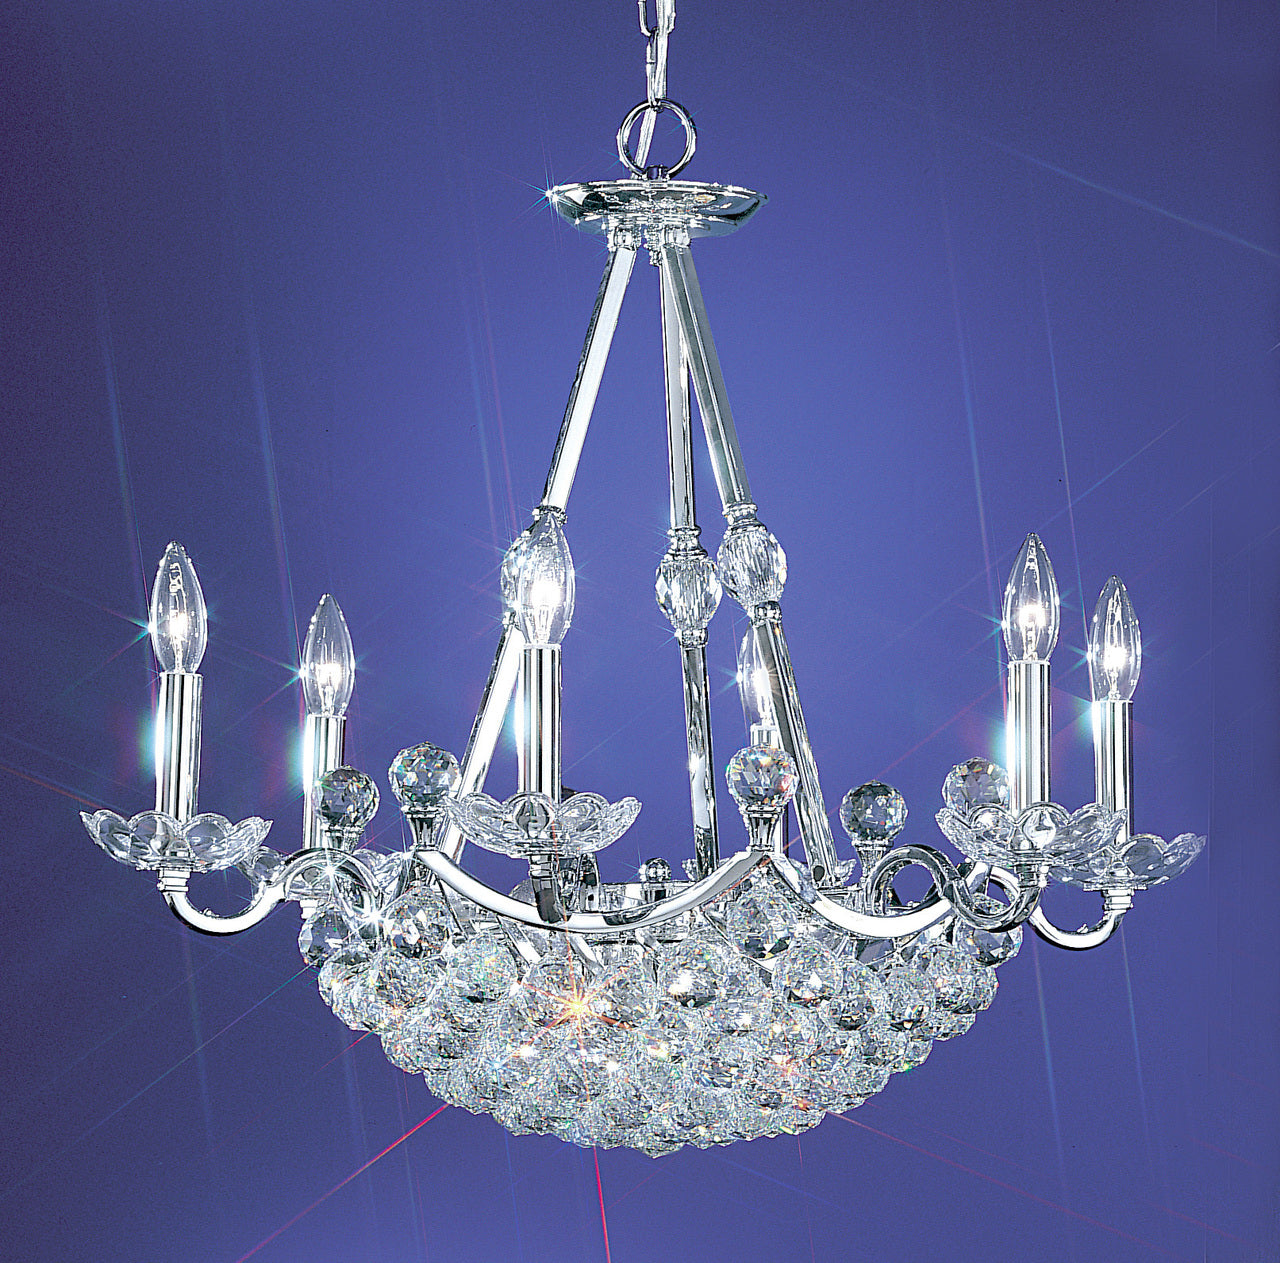 Classic Lighting 69776 CH S Solitaire Crystal Chandelier in Chrome